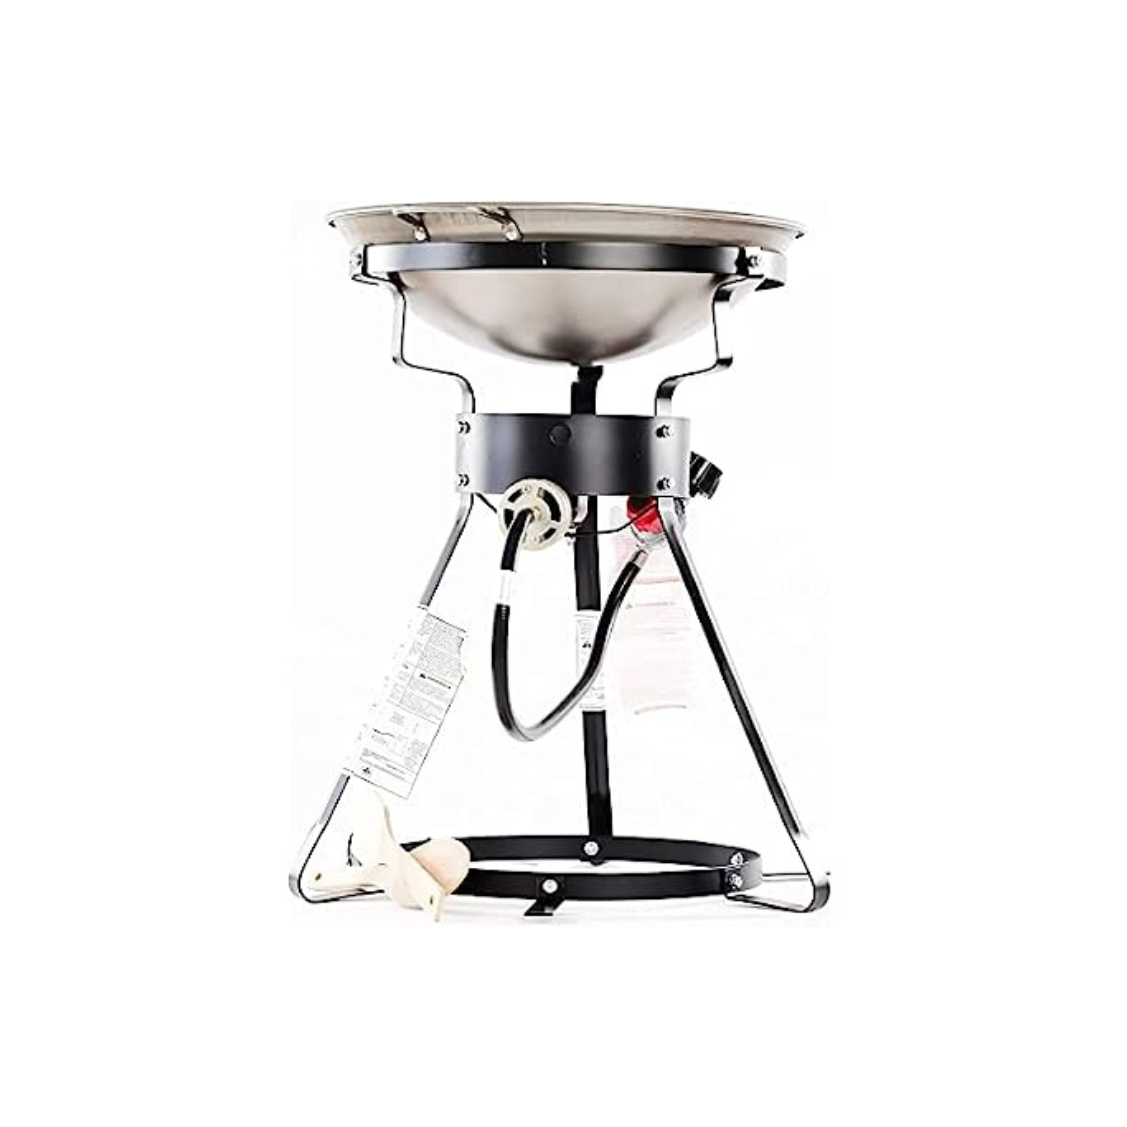 King Kooker 24WC 12" Portable Propane Outdoor Cooker with Wok